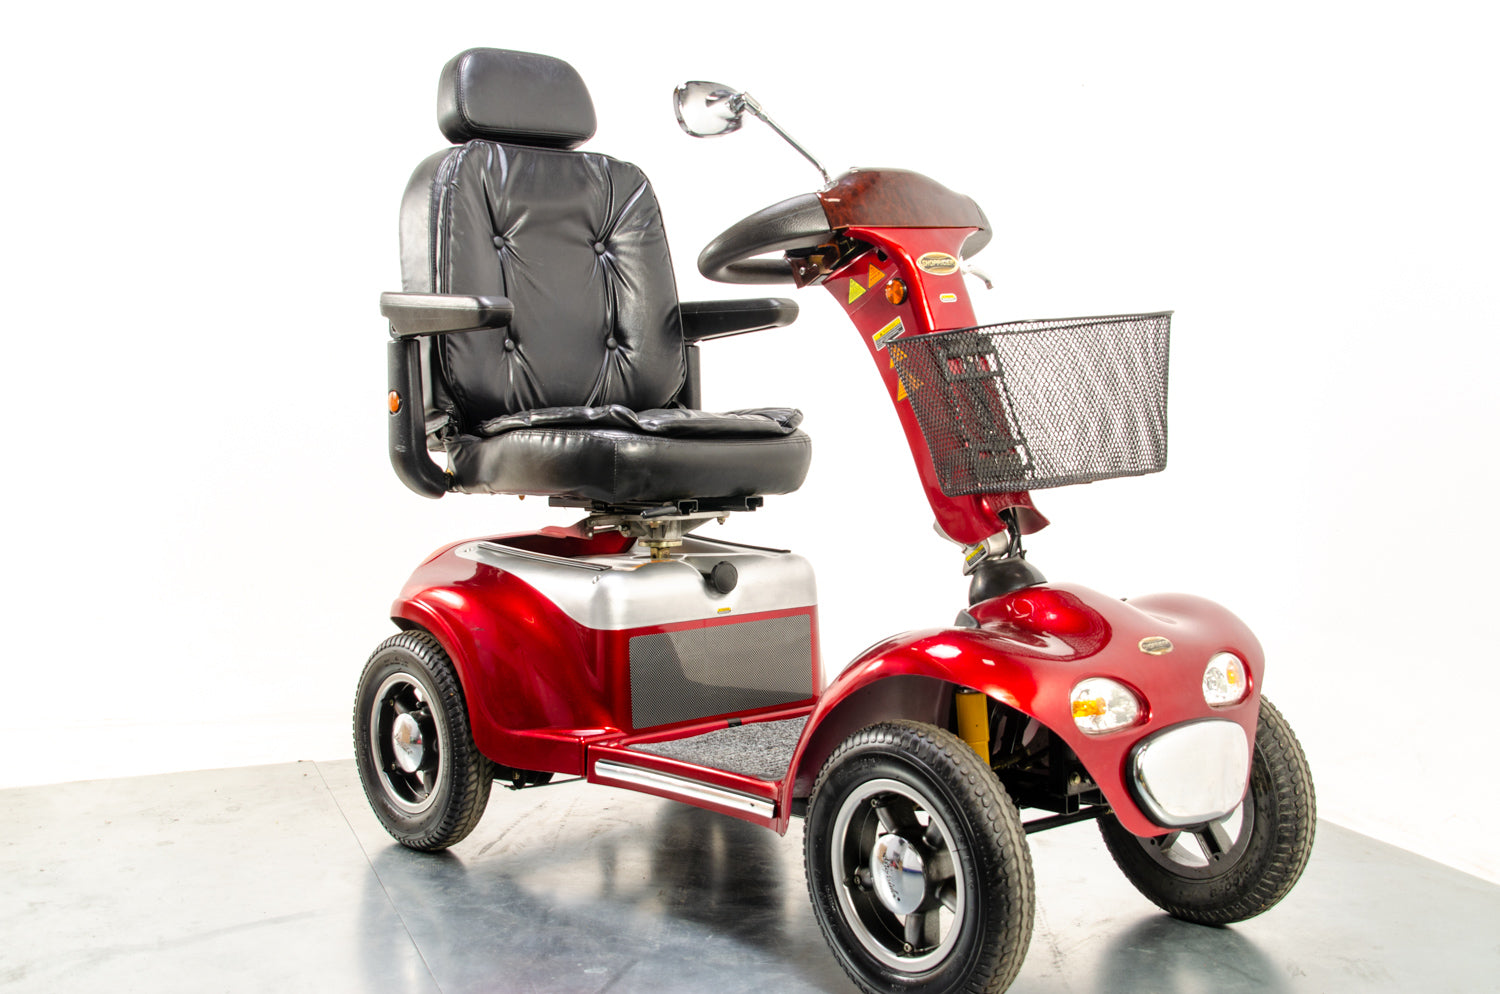 Shoprider Cordoba Off-Road All-Terrain Used Mobility Scooter Large 8mph Roma Red 13466